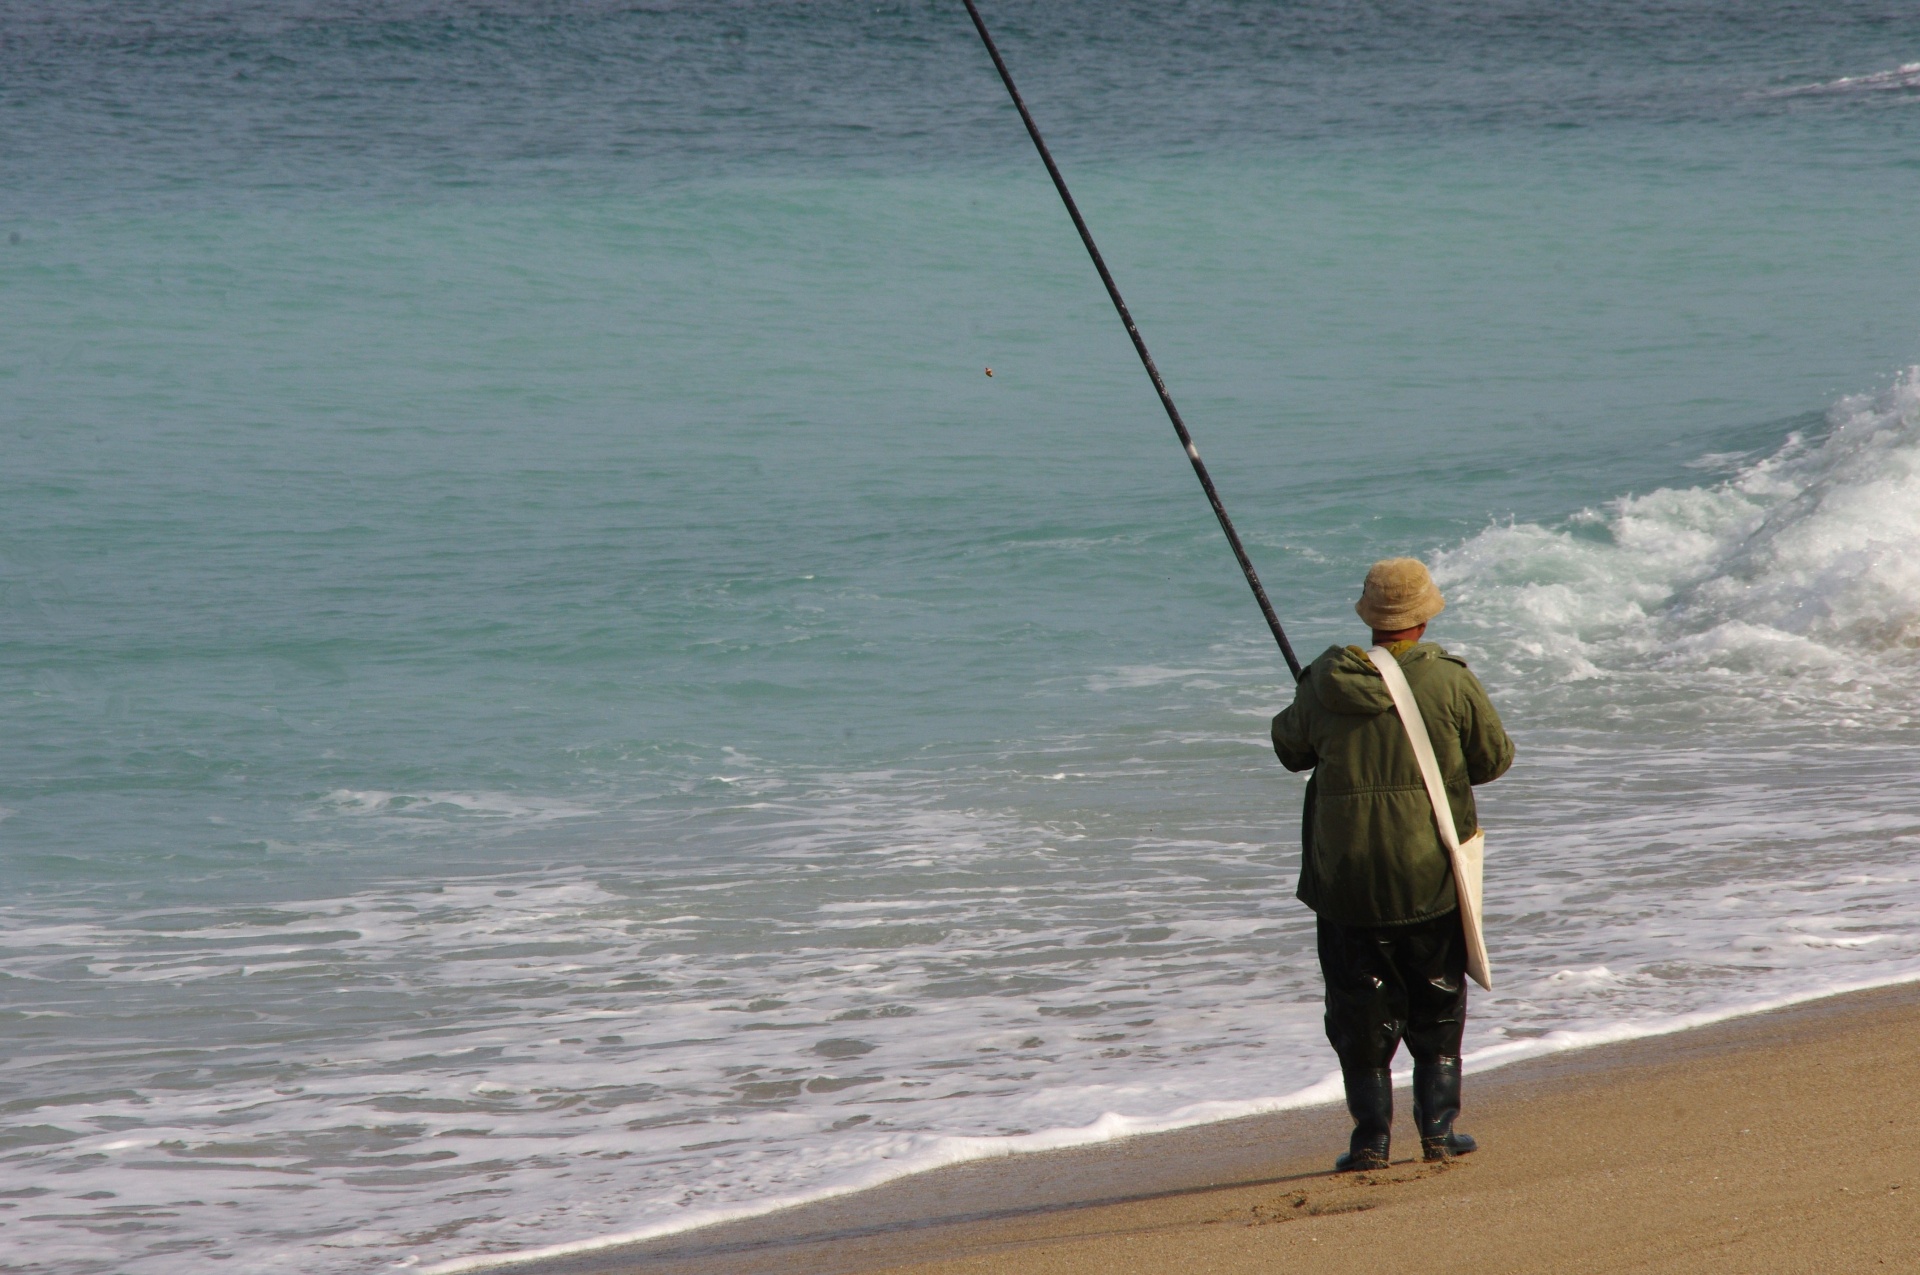 Lonely fisherman standing on sandy beach